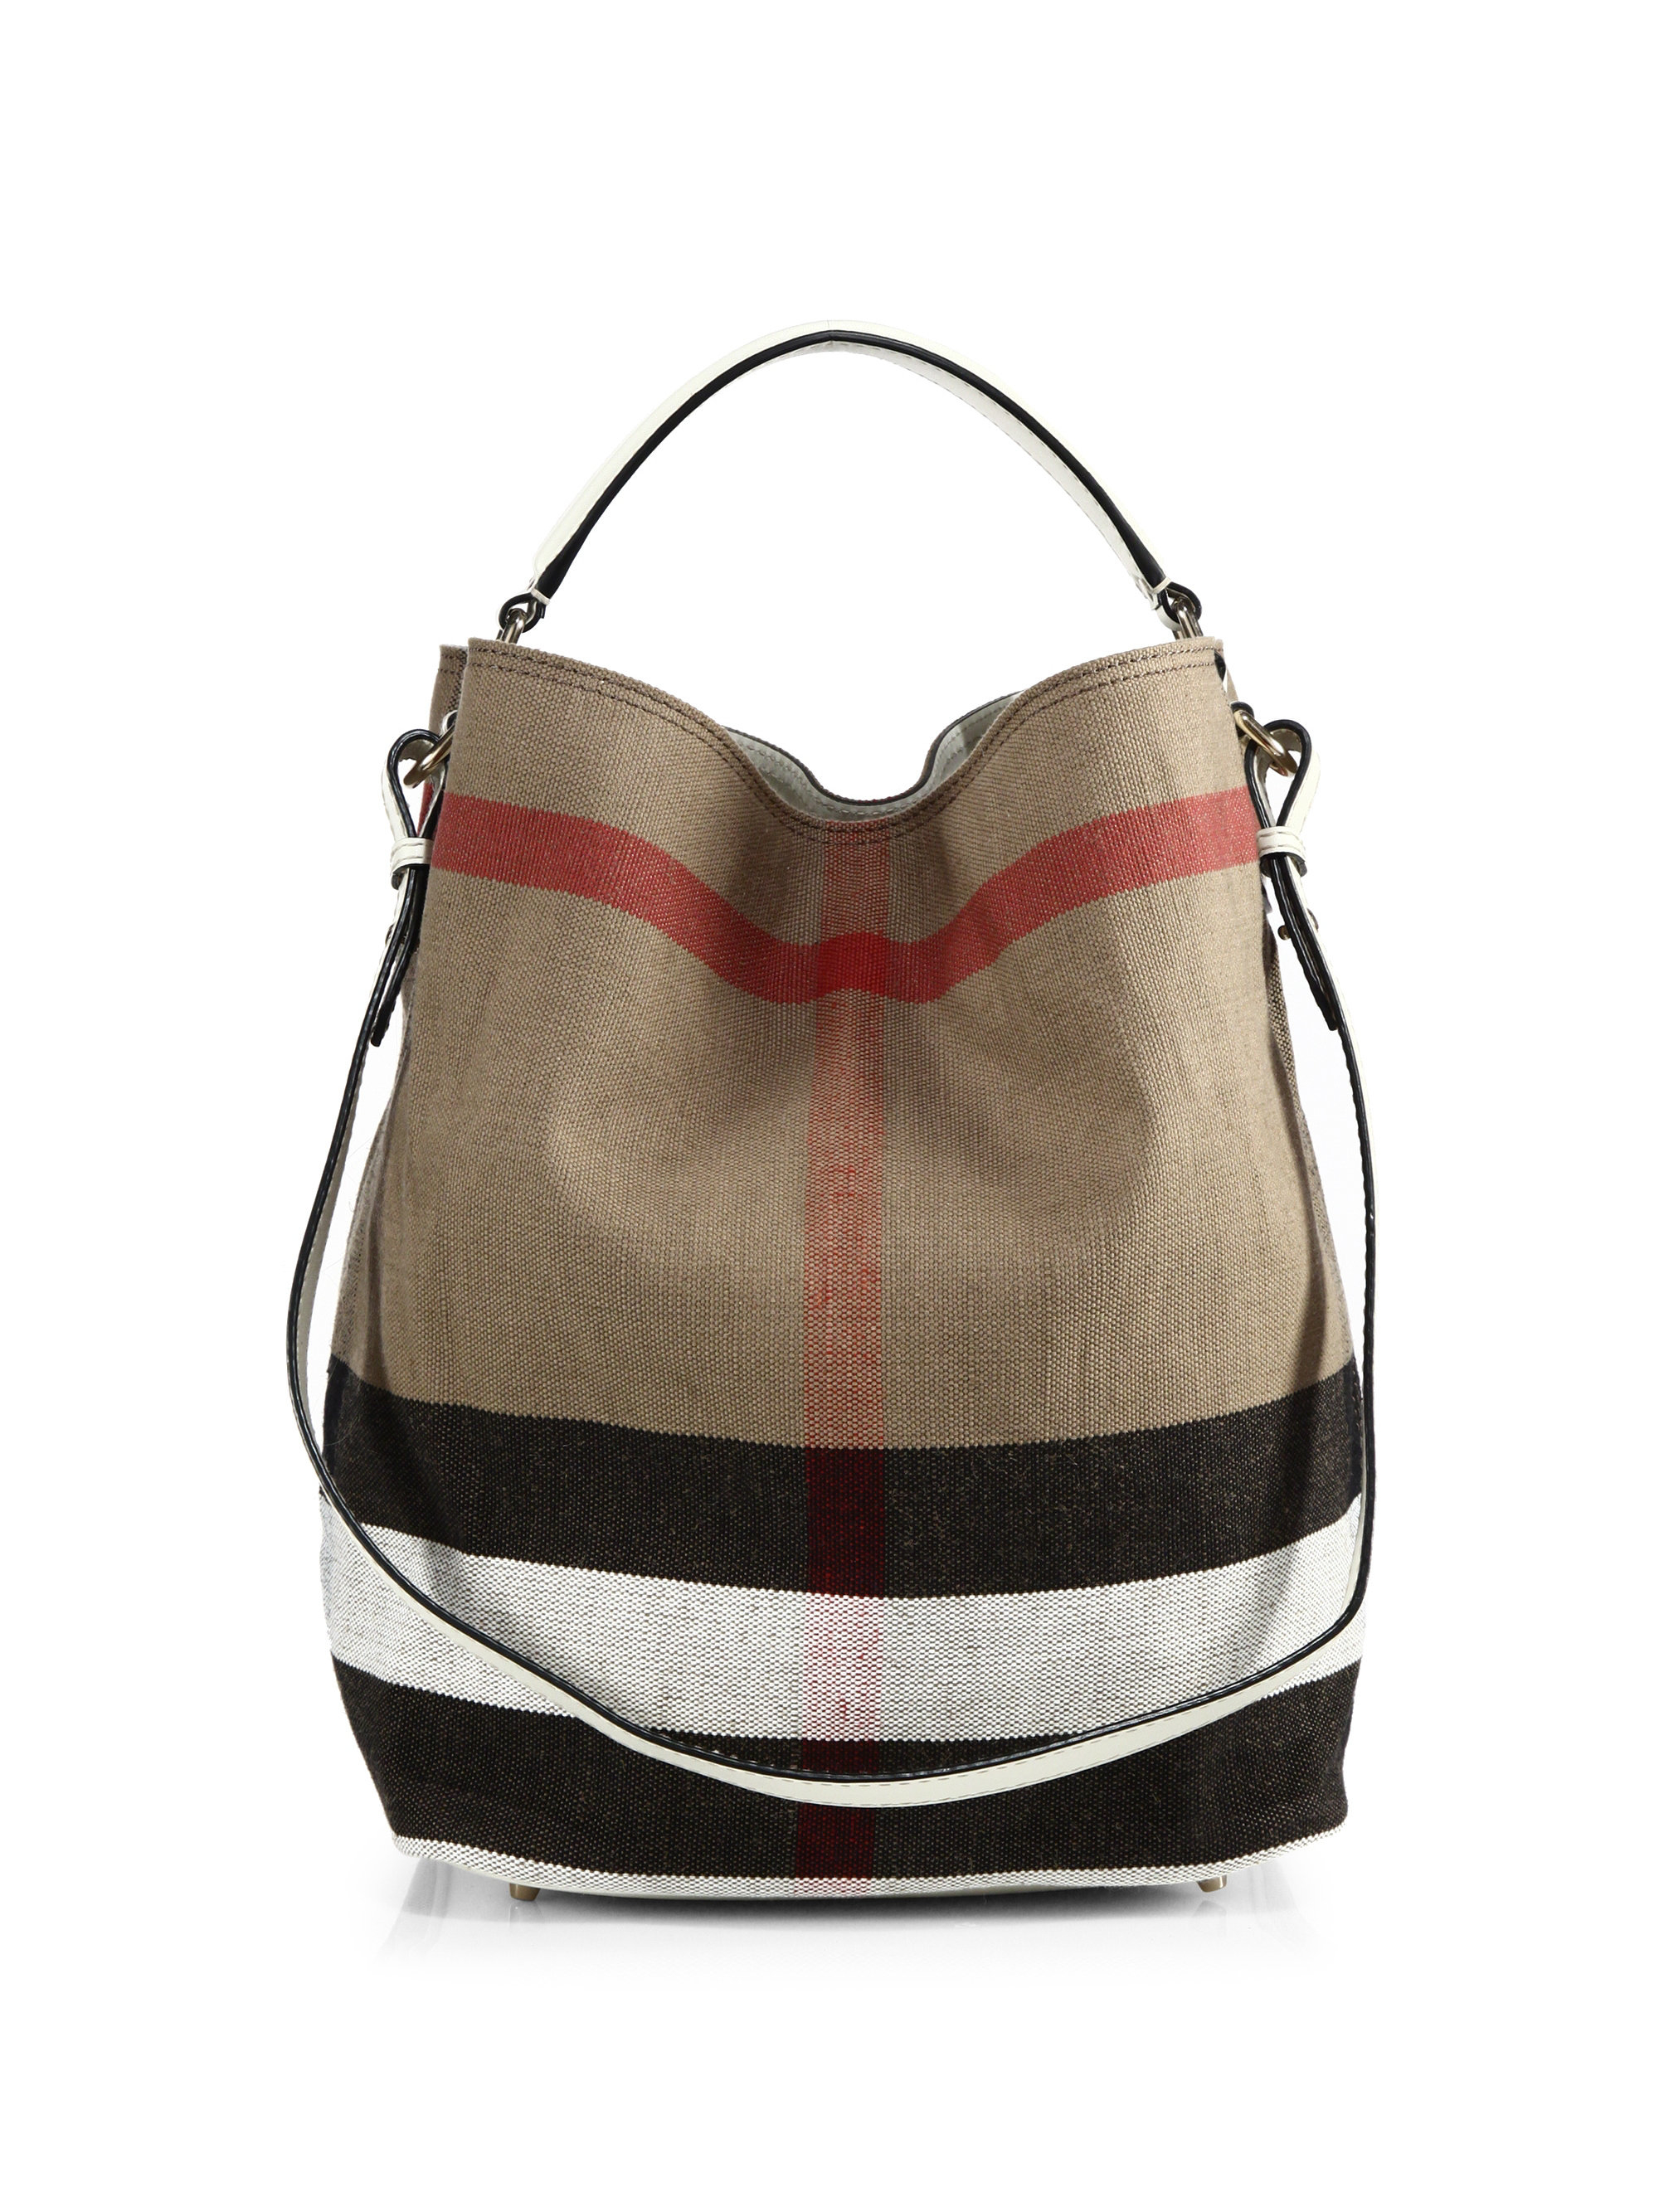 Burberry Ashby Medium House Check Canvas Shoulder Bag in Natural | Lyst